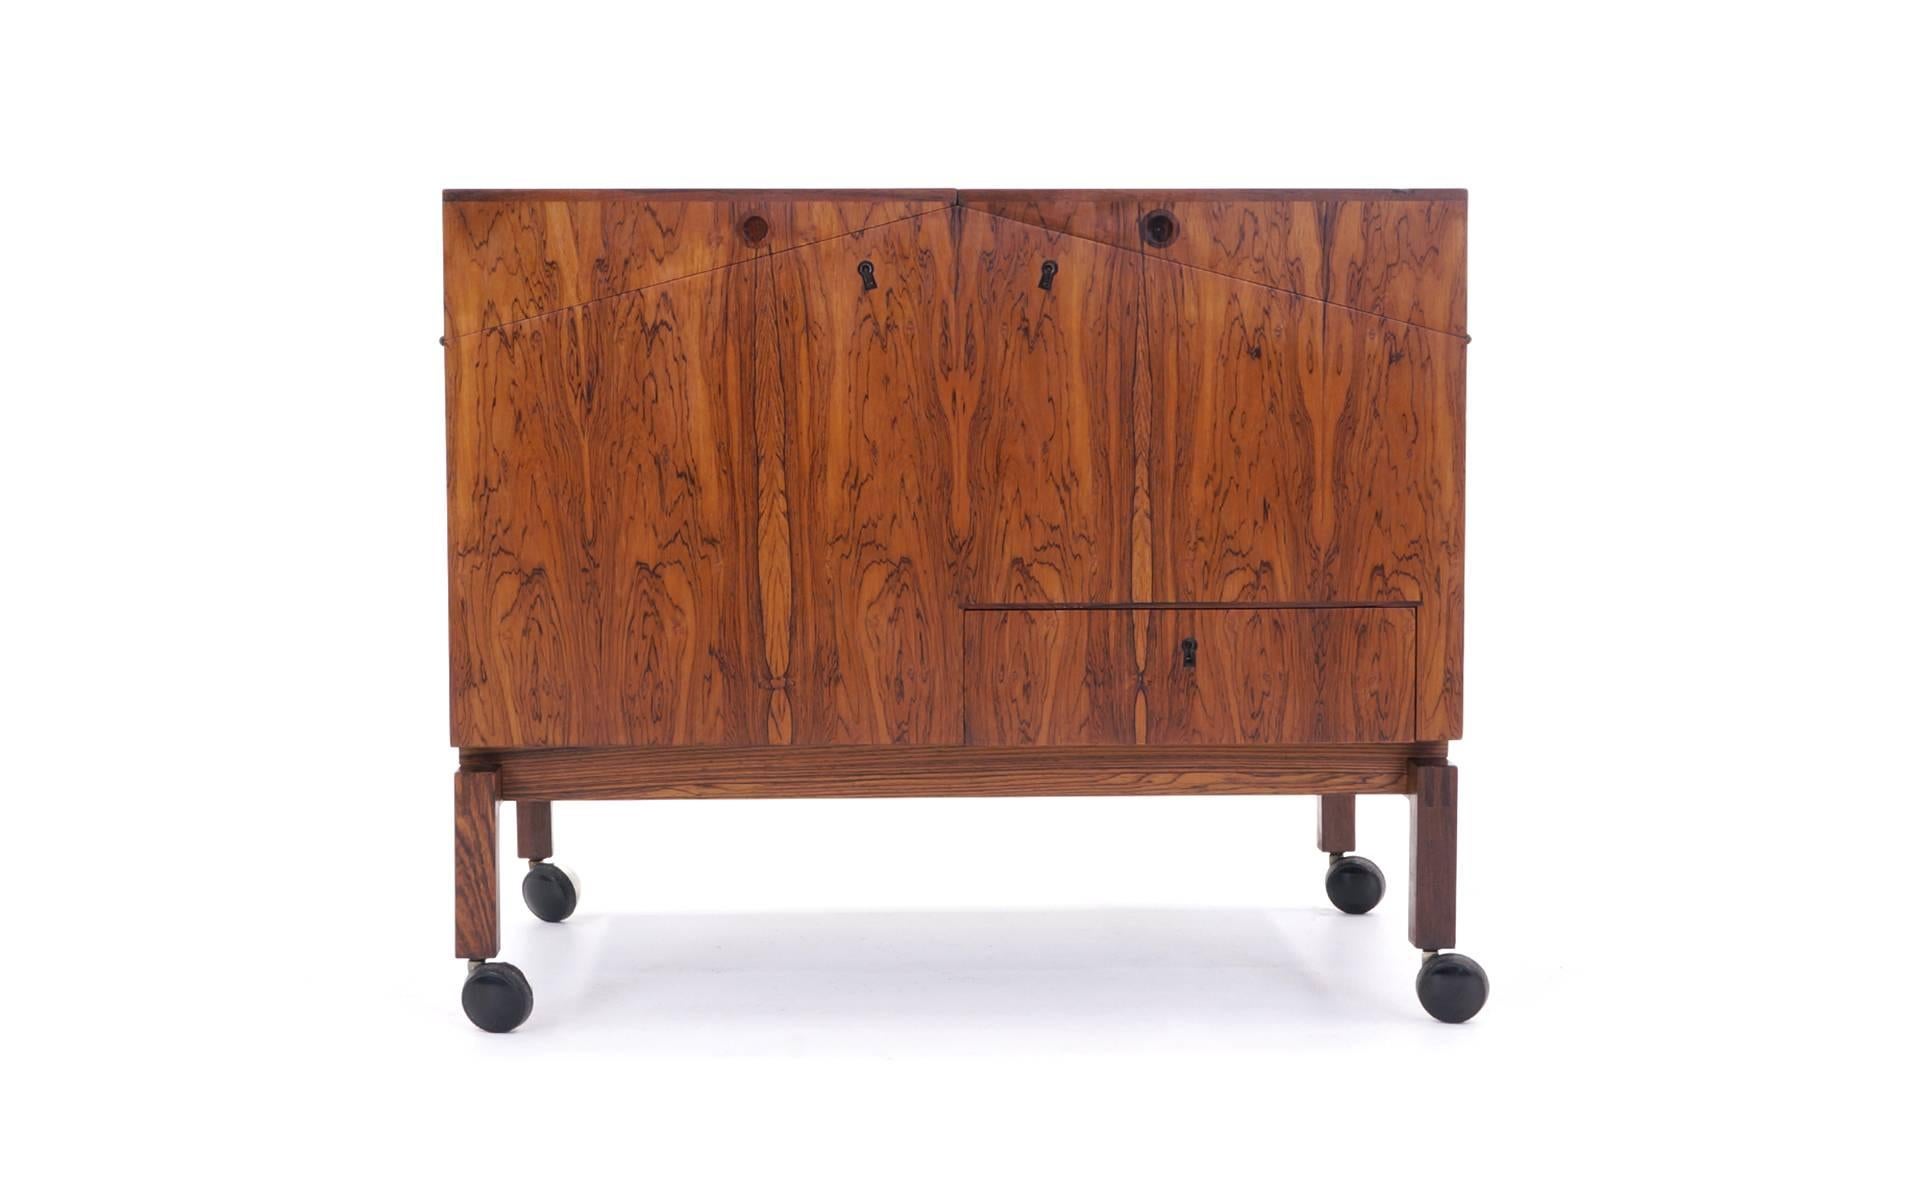 Beautiful Brazilian rosewood Danish modern bar cabinet designed by Leif Alring for C.F. Christensen, Denmark, 1964. Bar features one locking drawer and two locking flip-top doors concealing bottle storage and one removable tray. Dimensions are